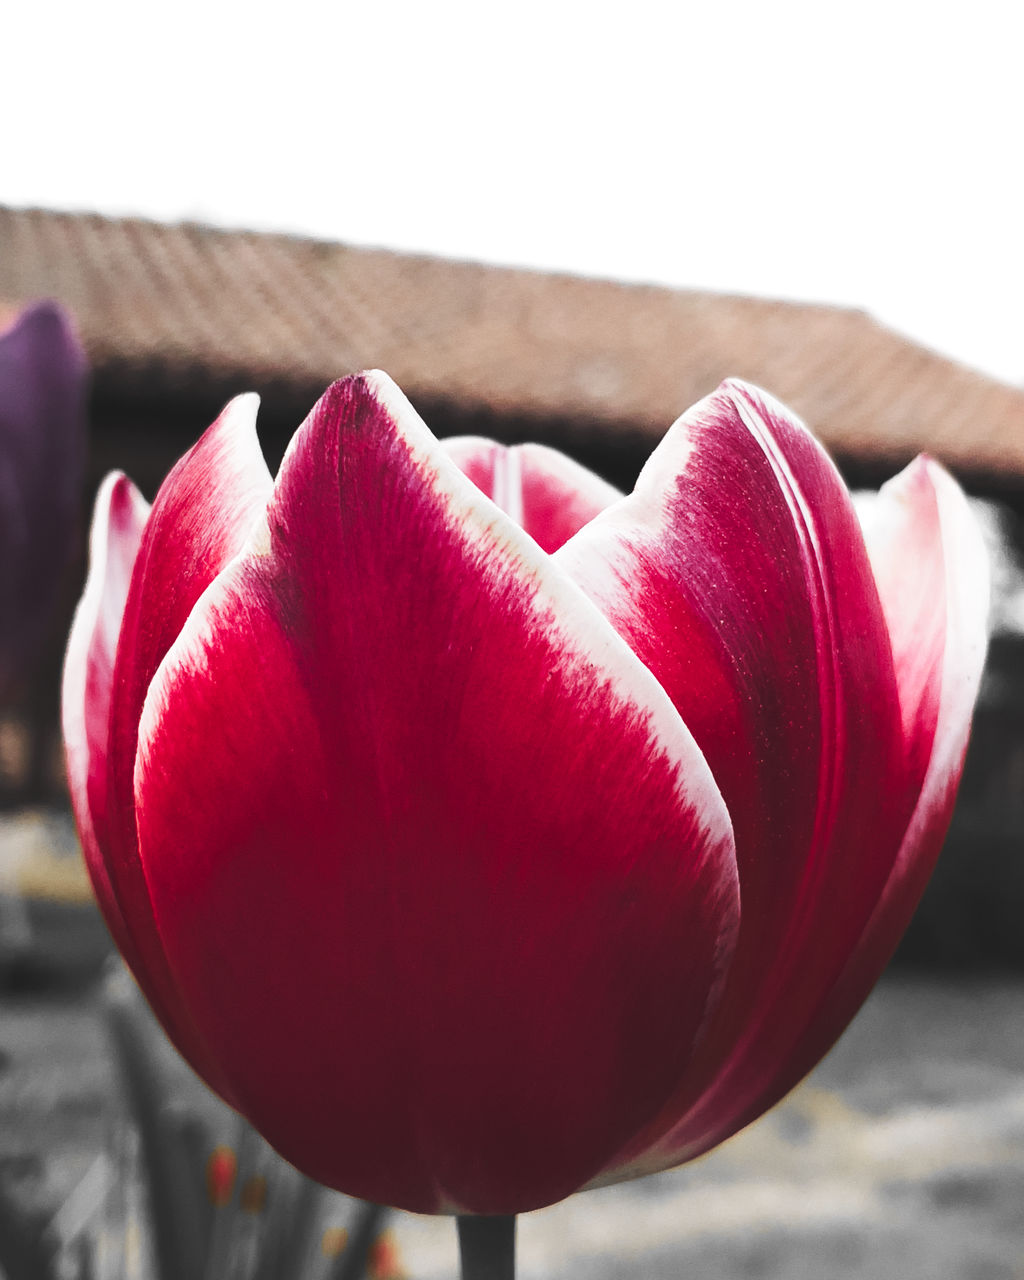 pink, red, flower, petal, close-up, freshness, tulip, plant, focus on foreground, beauty in nature, nature, flowering plant, no people, day, outdoors, fragility, heart shape